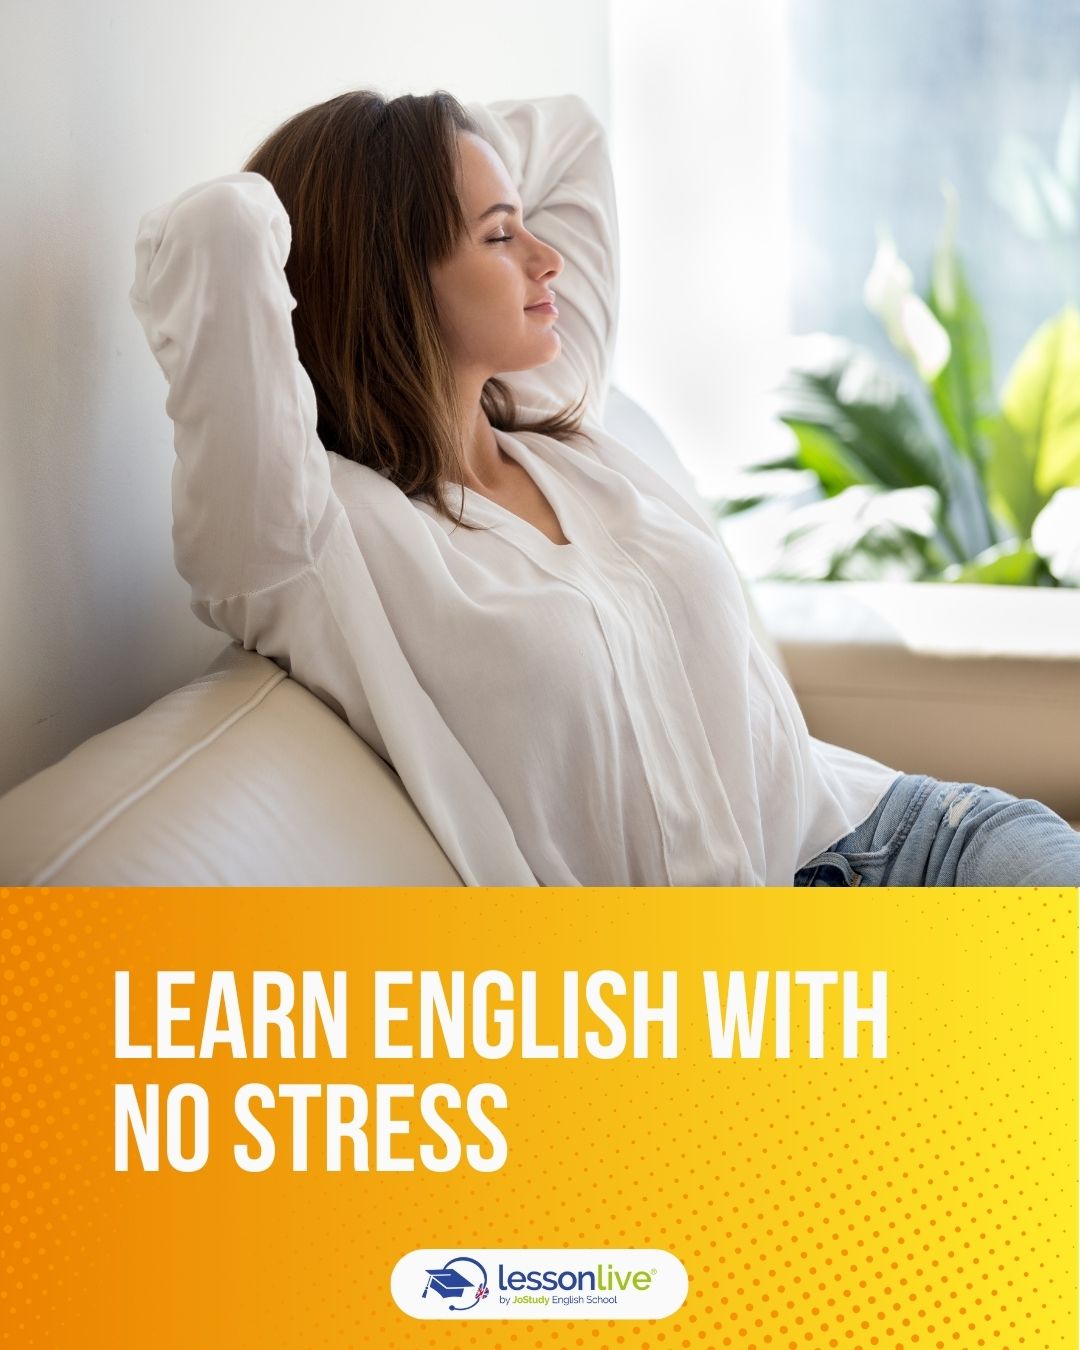 LESSON LIVE - ONLINE ENGLISH CURSES - learn english no stress